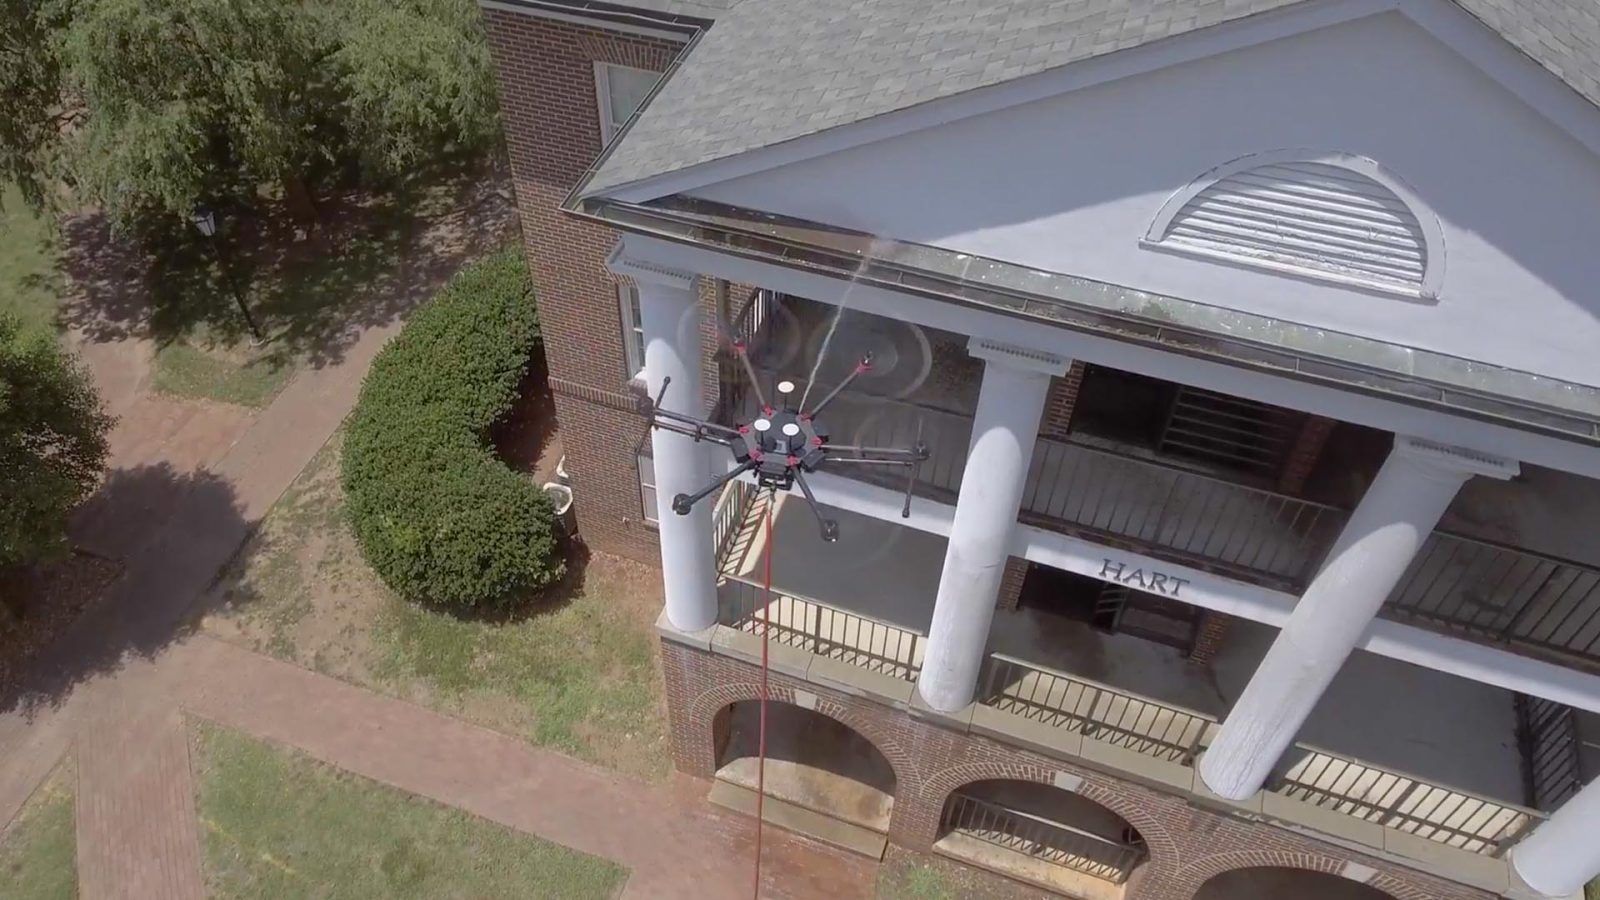 Building cleaning drones take flight in North Carolina